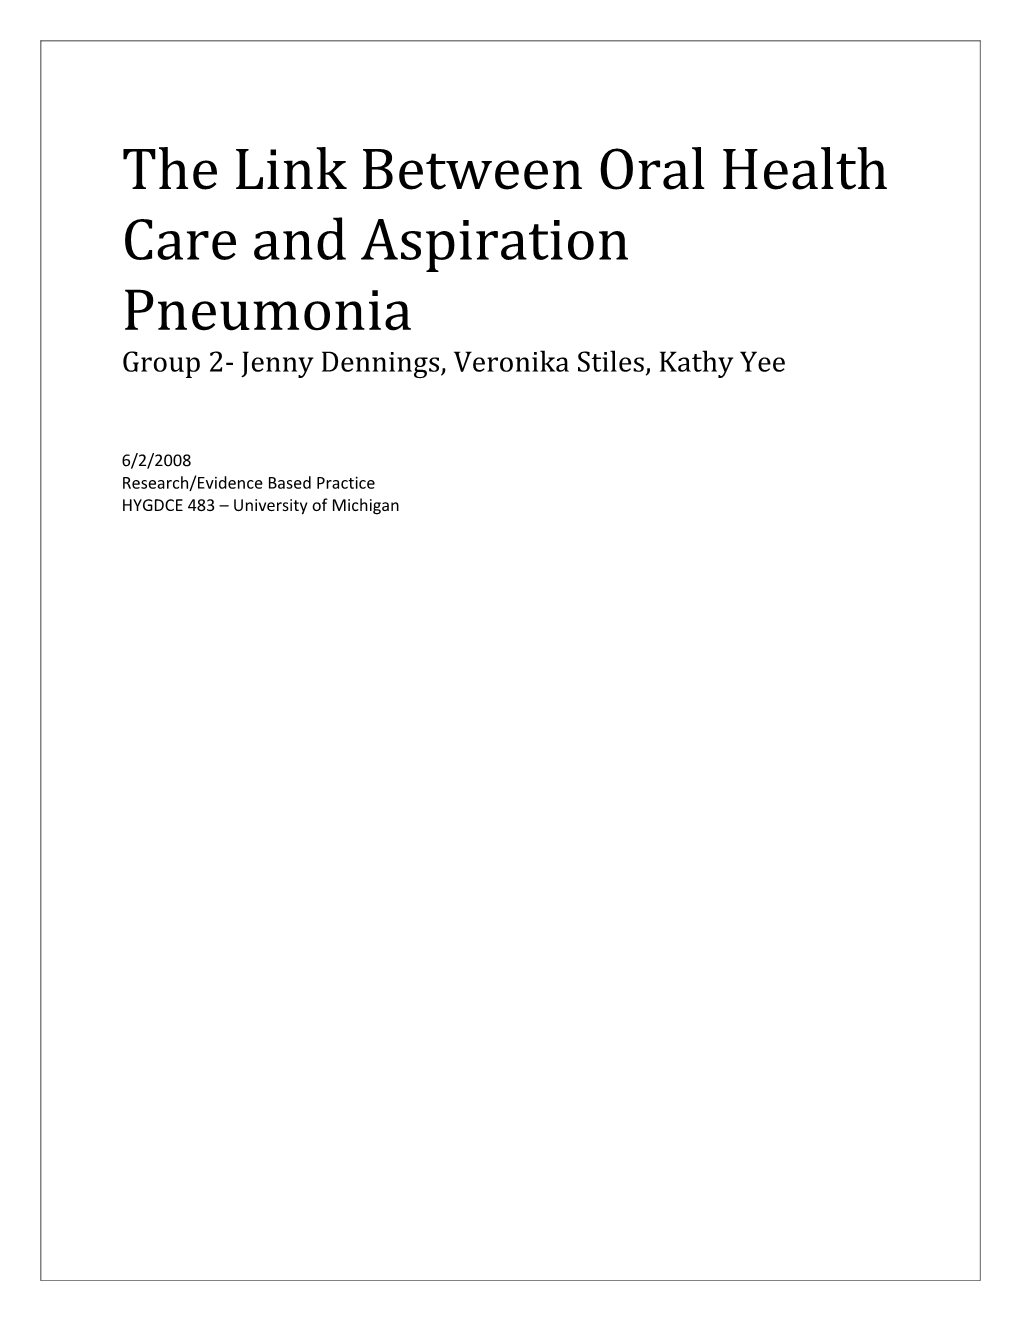 The Link Between Oral Health Care and Aspiration Pneumonia